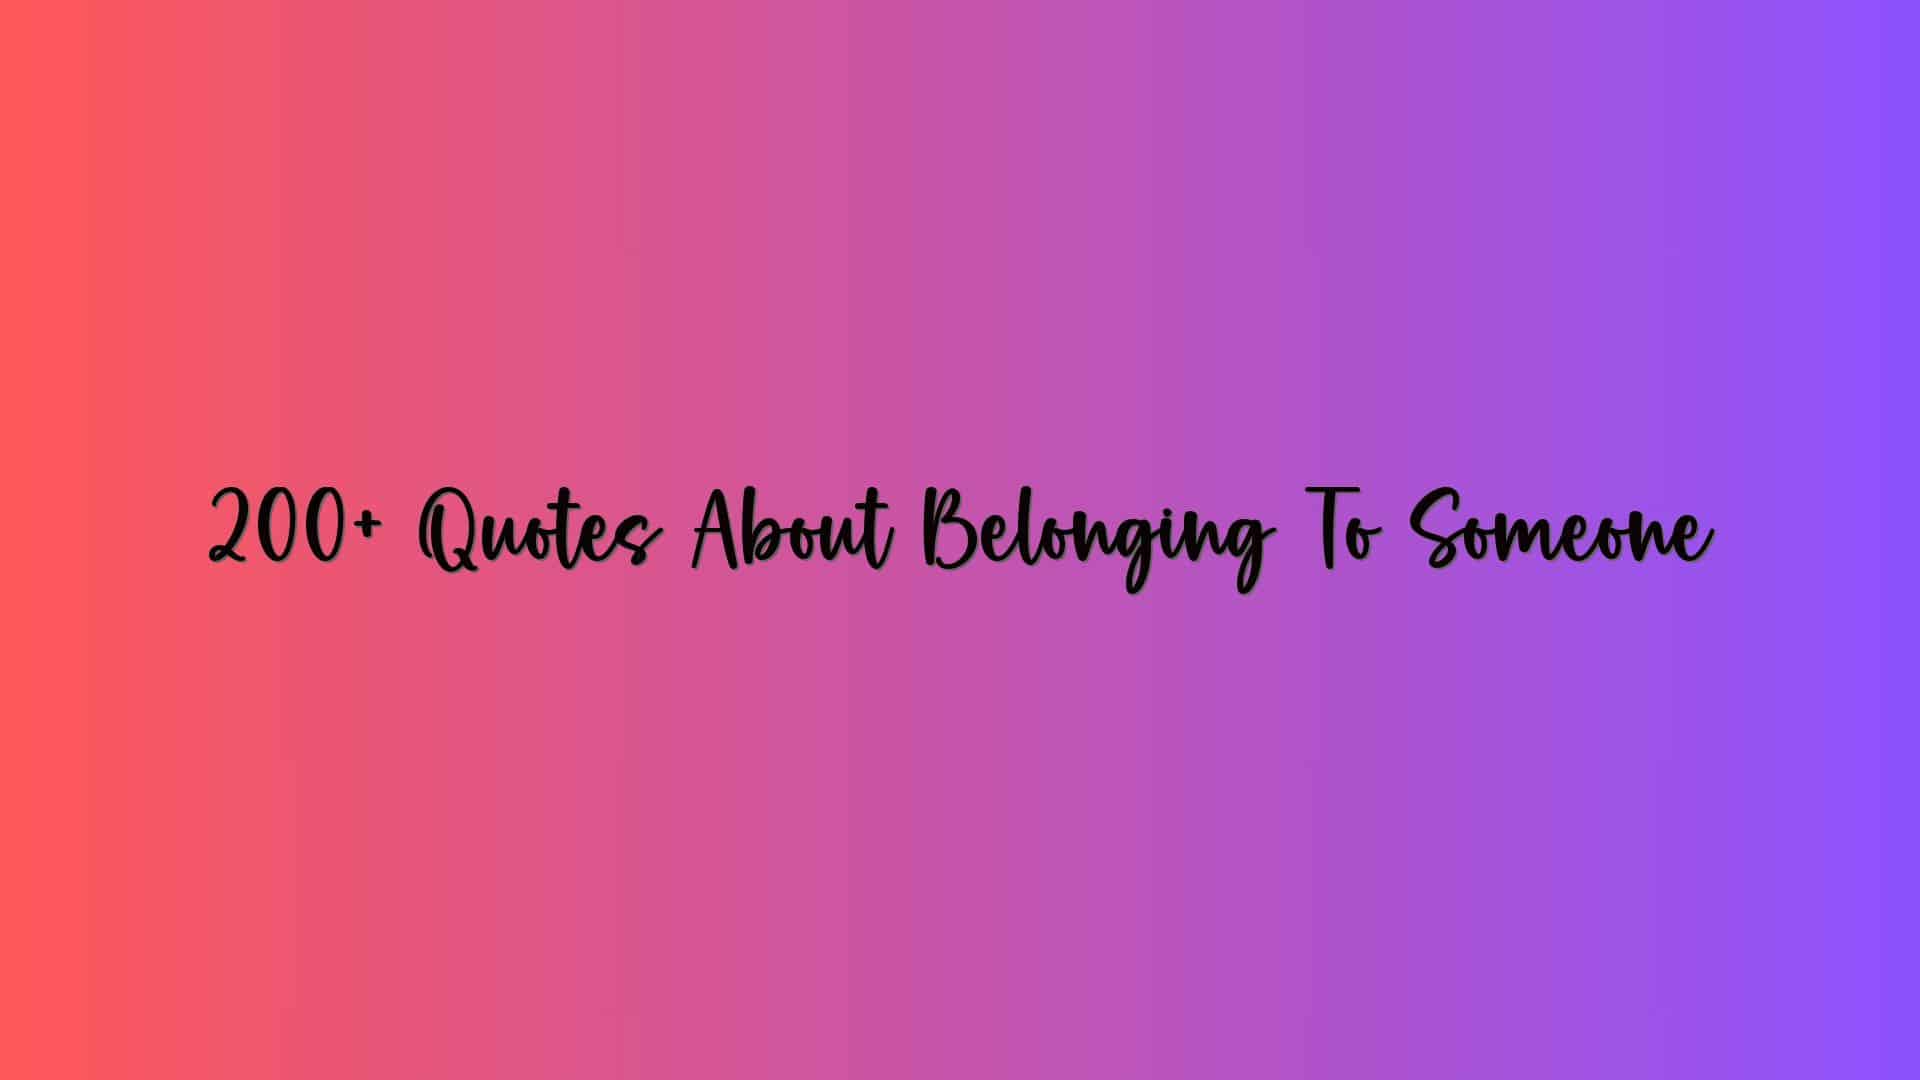 200+ Quotes About Belonging To Someone